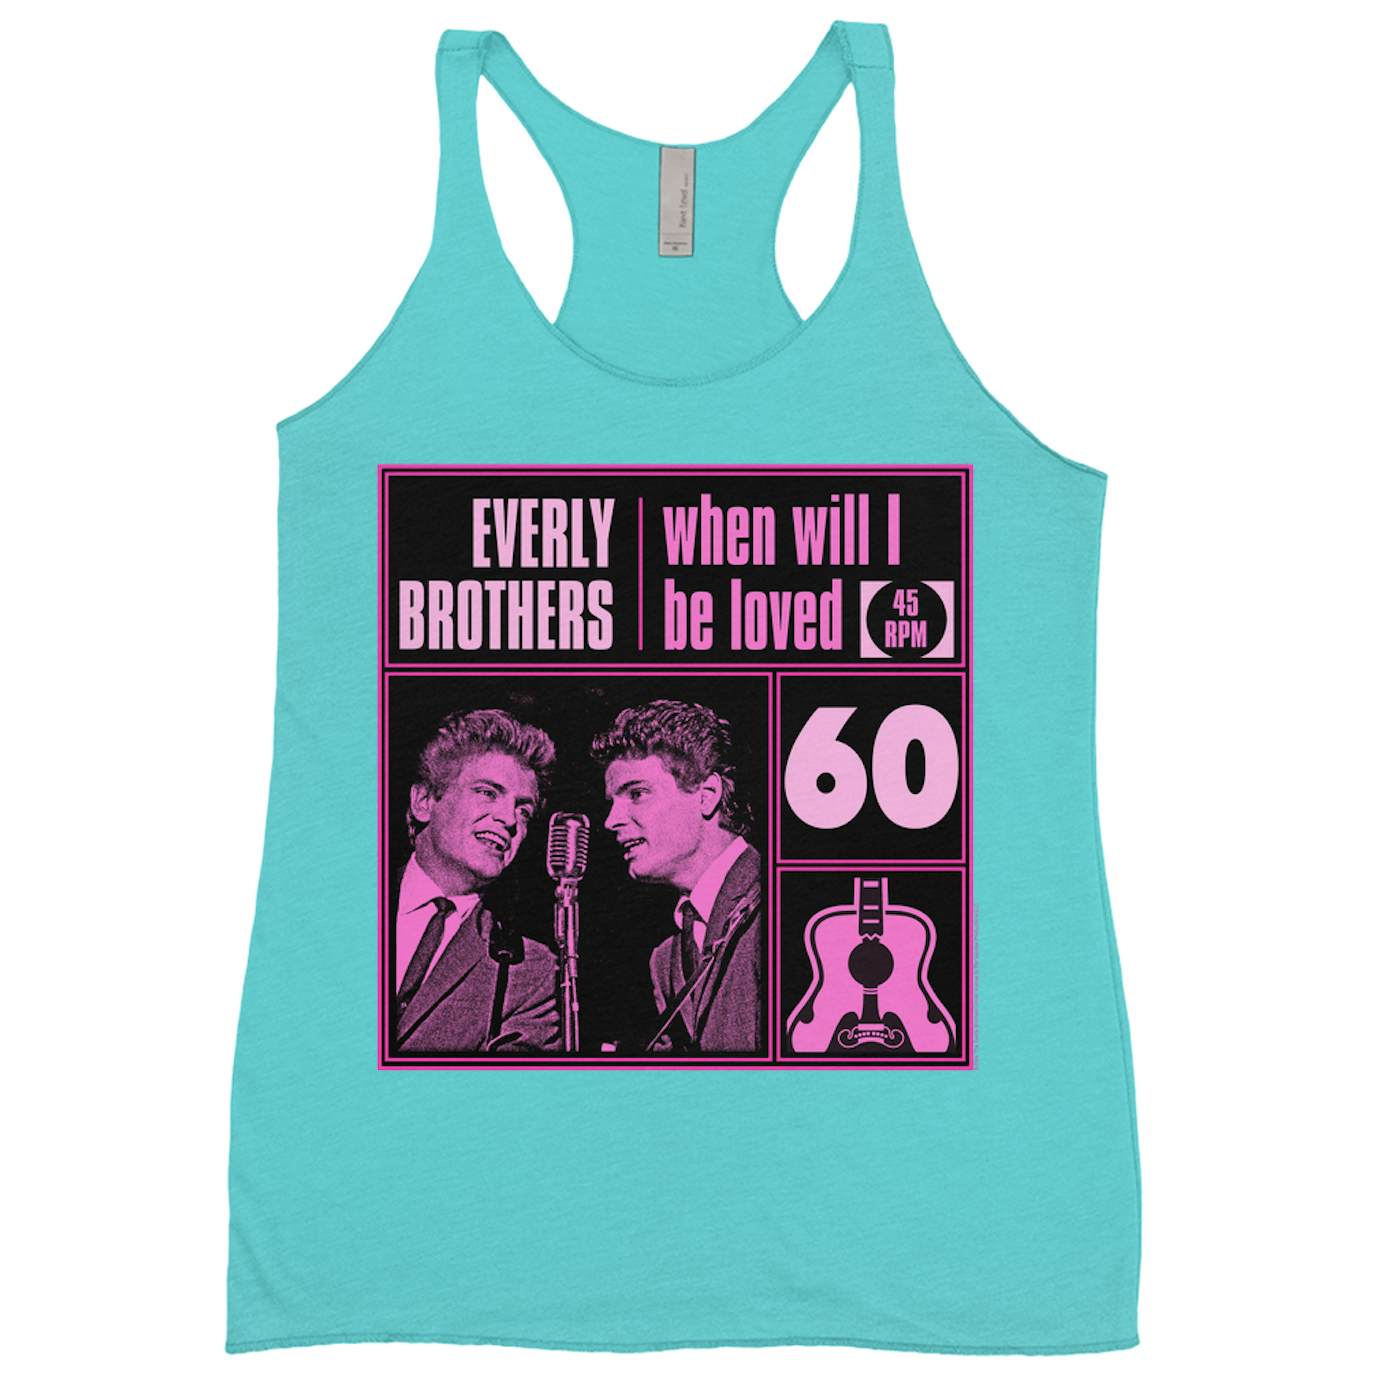 The Everly Brothers Ladies' Tank Top | When Will I Be Loved Pink Black The Everly Brothers Shirt